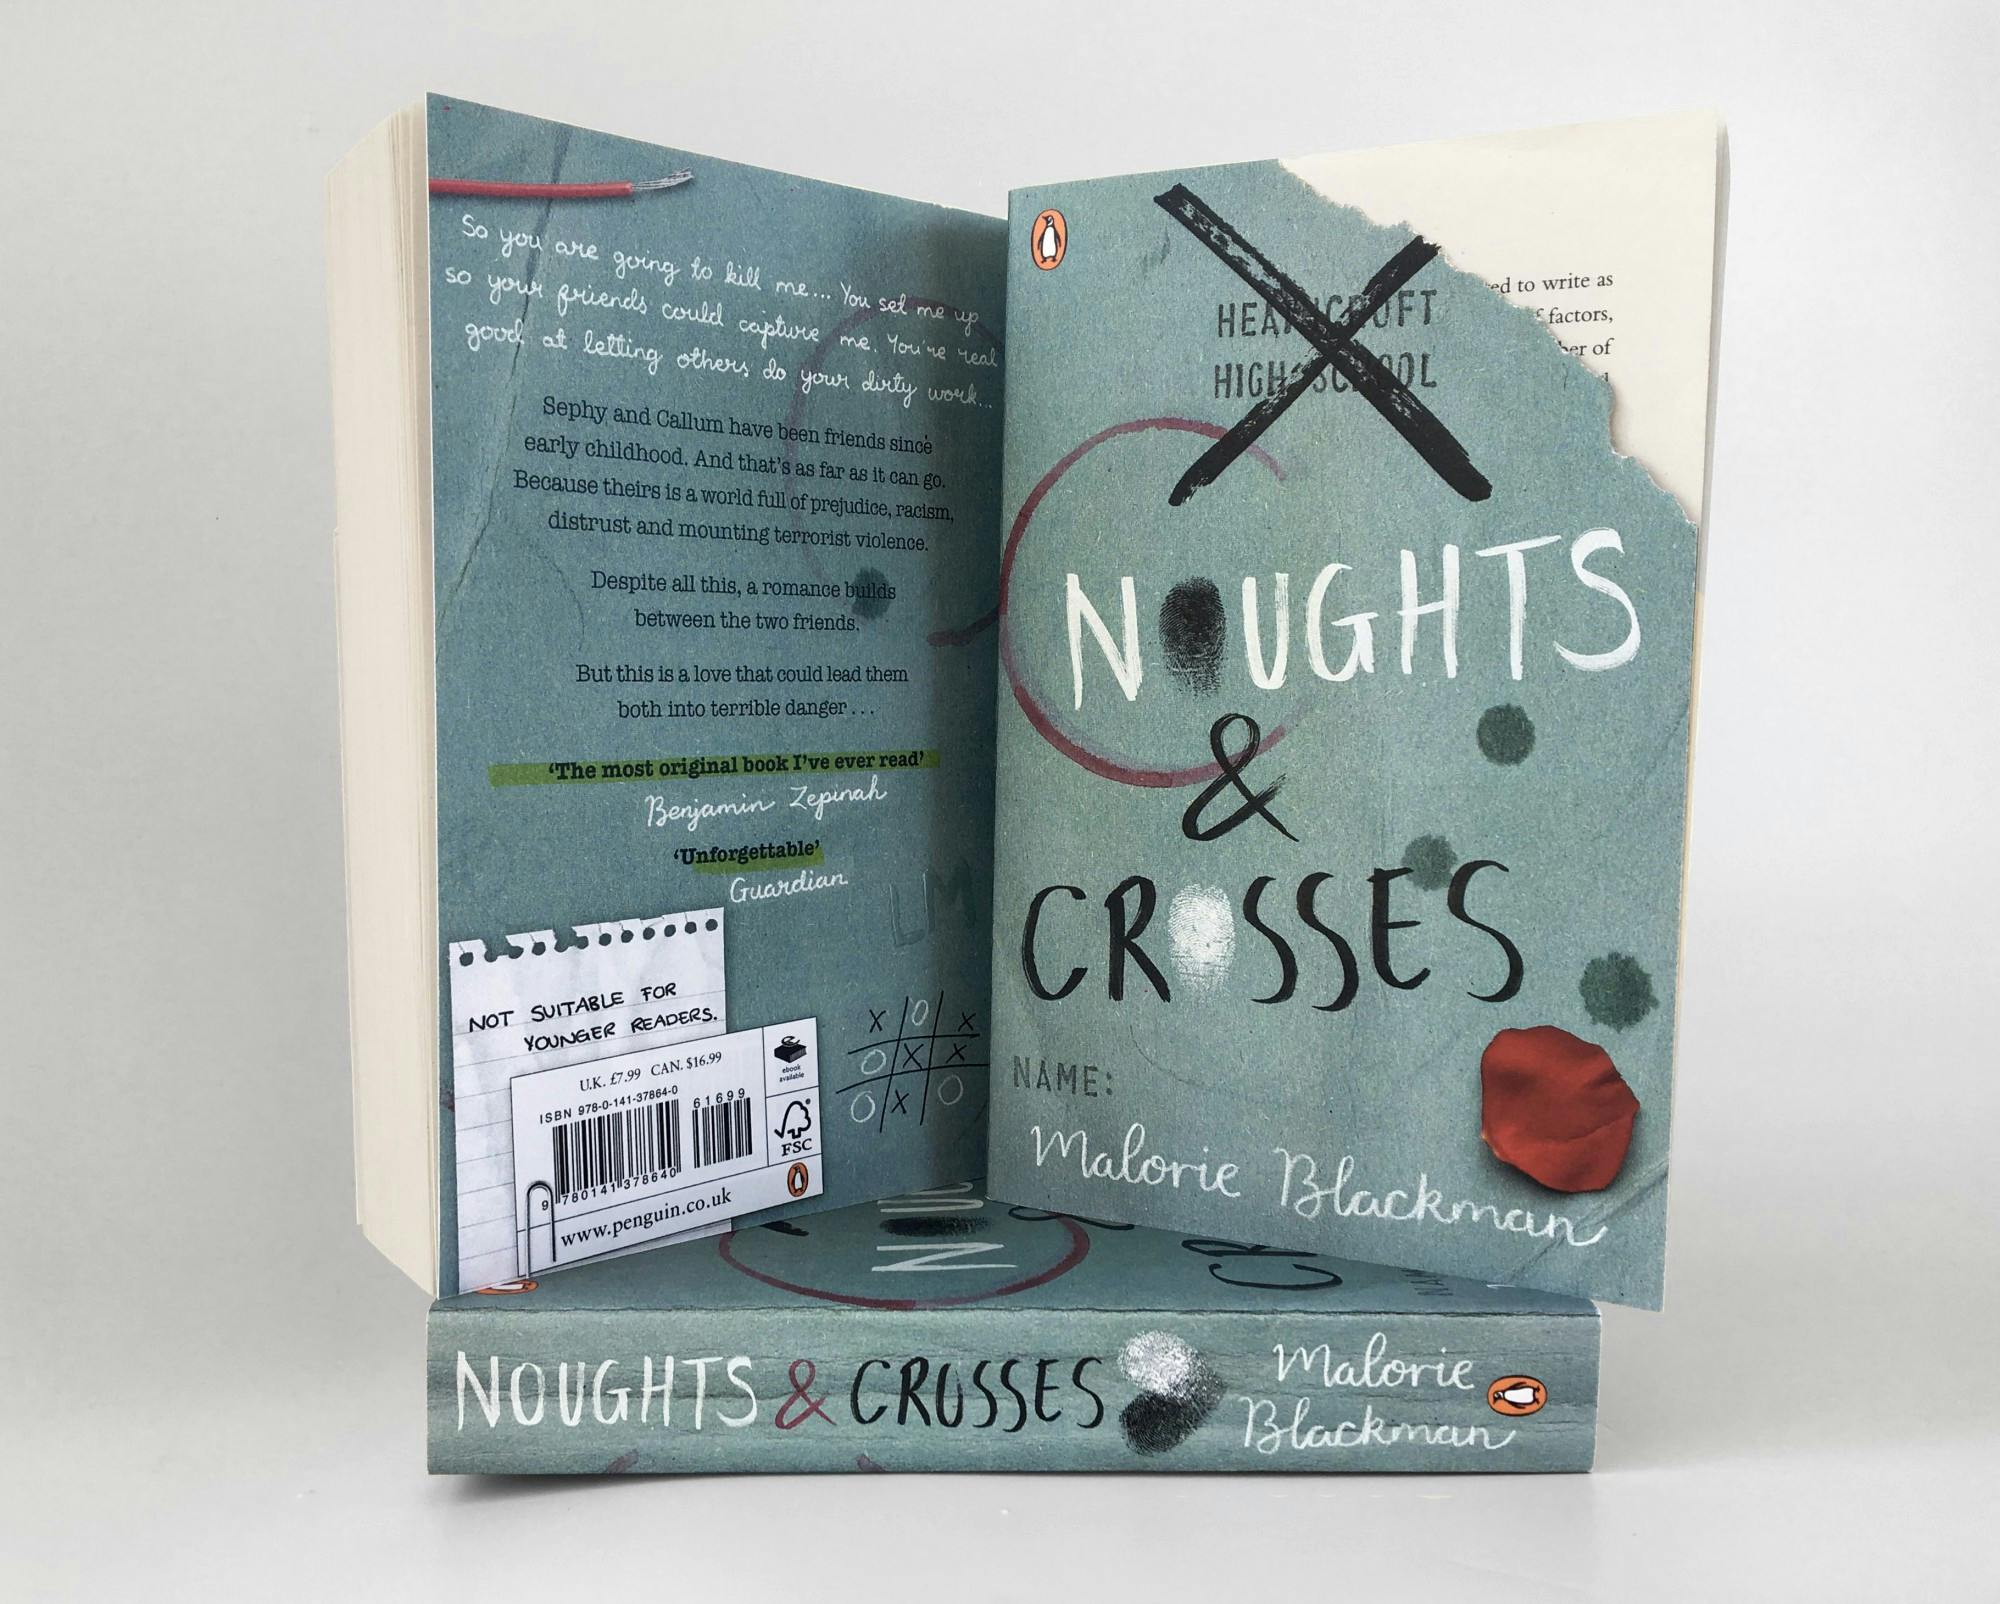 Noughts and Crosses cover by Helena Dore